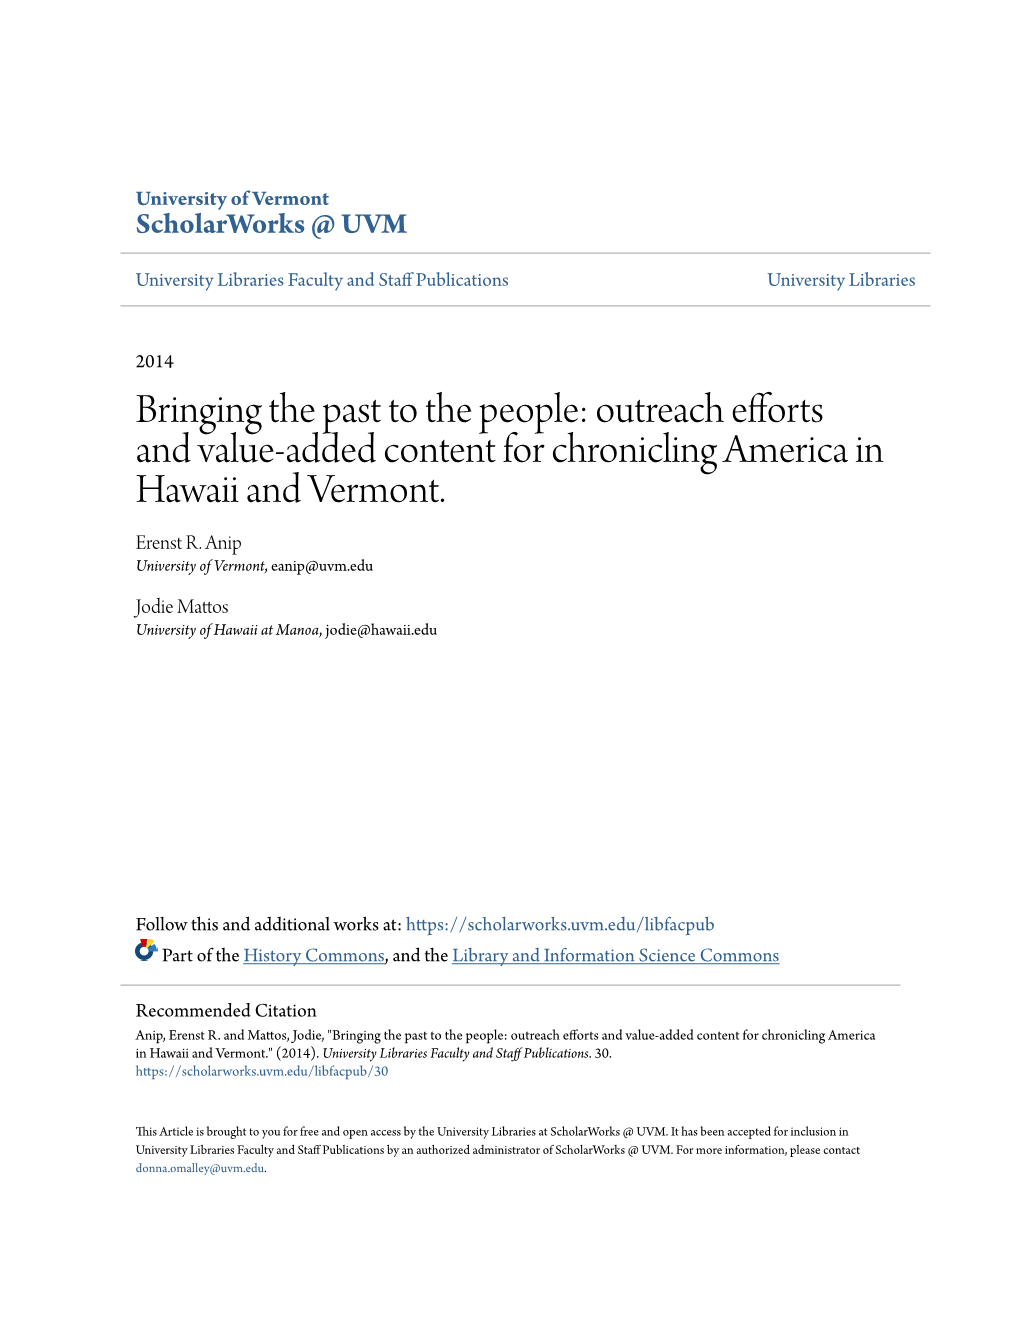 Outreach Efforts and Value-Added Content for Chronicling America in Hawaii and Vermont